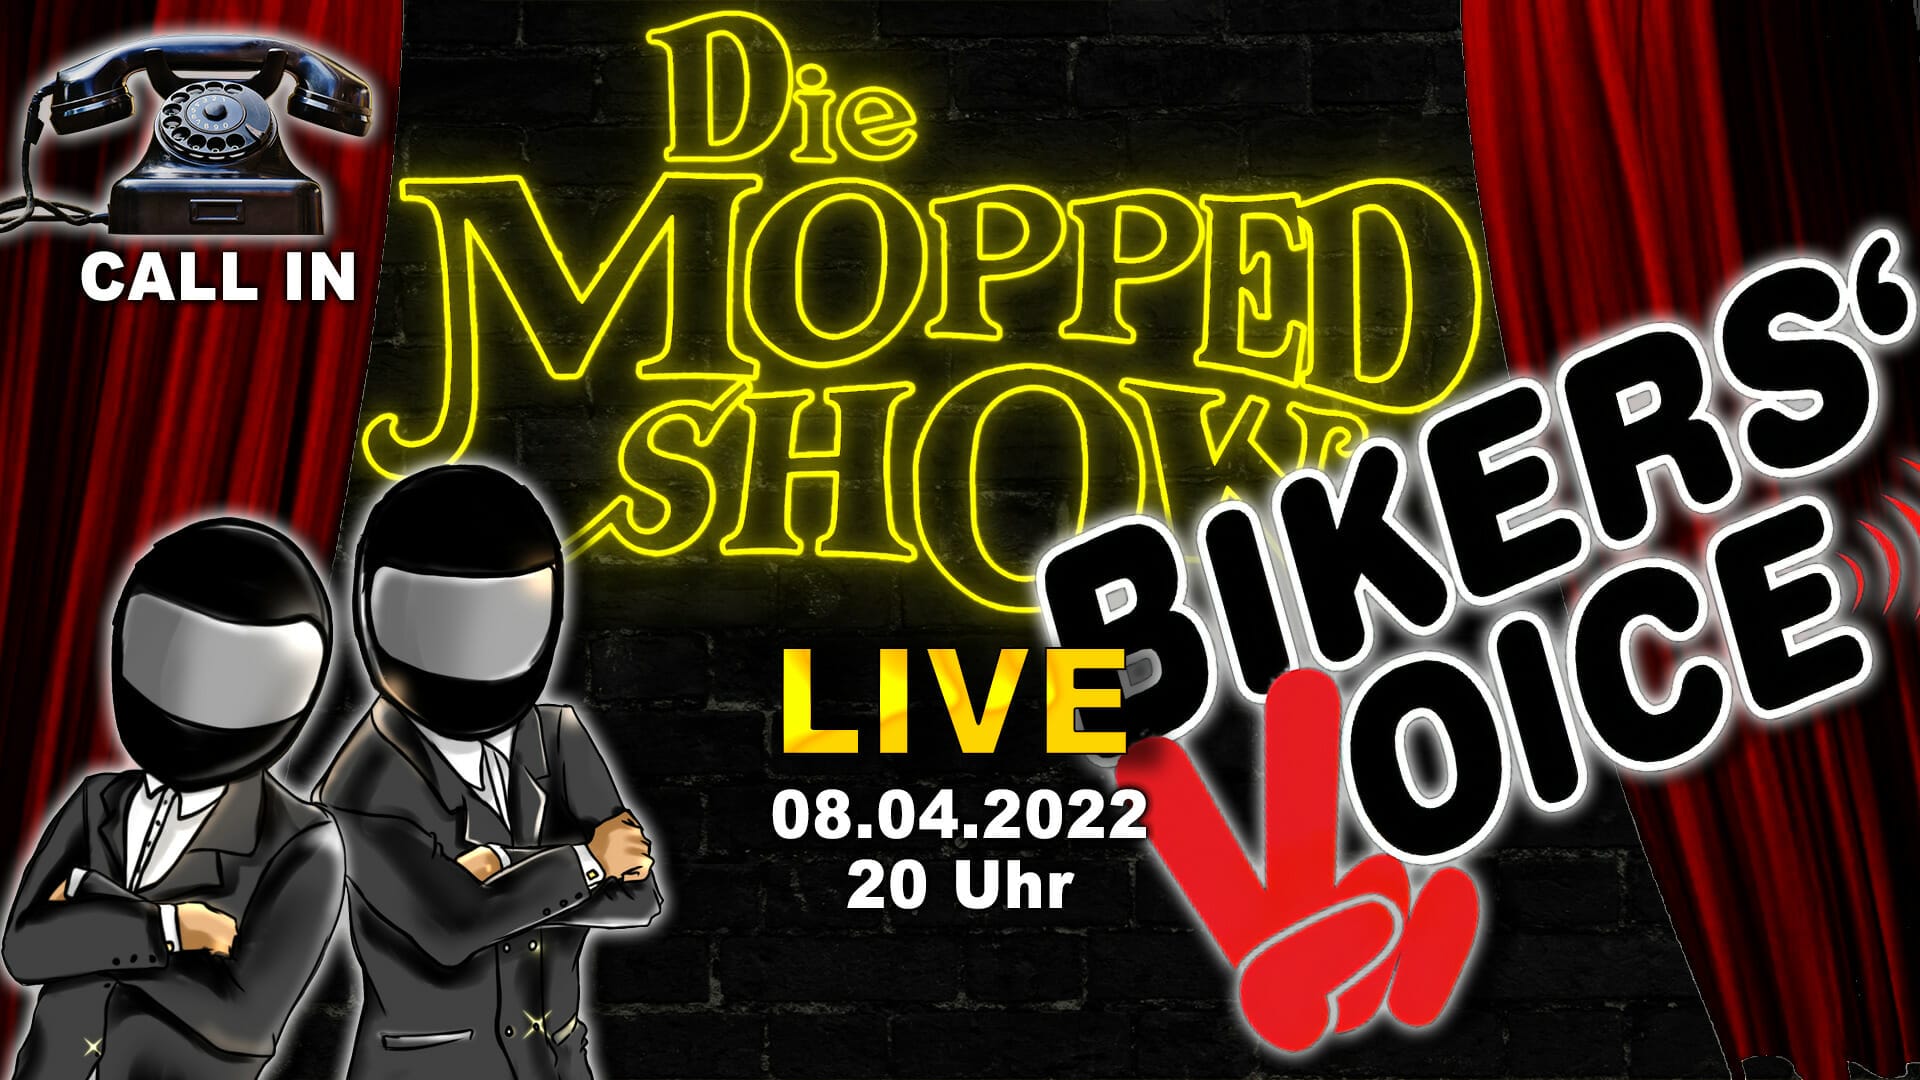 BIKERS VOICE – Tiroler 95db Modell – mit CALL IN – Die Mopped Show #33